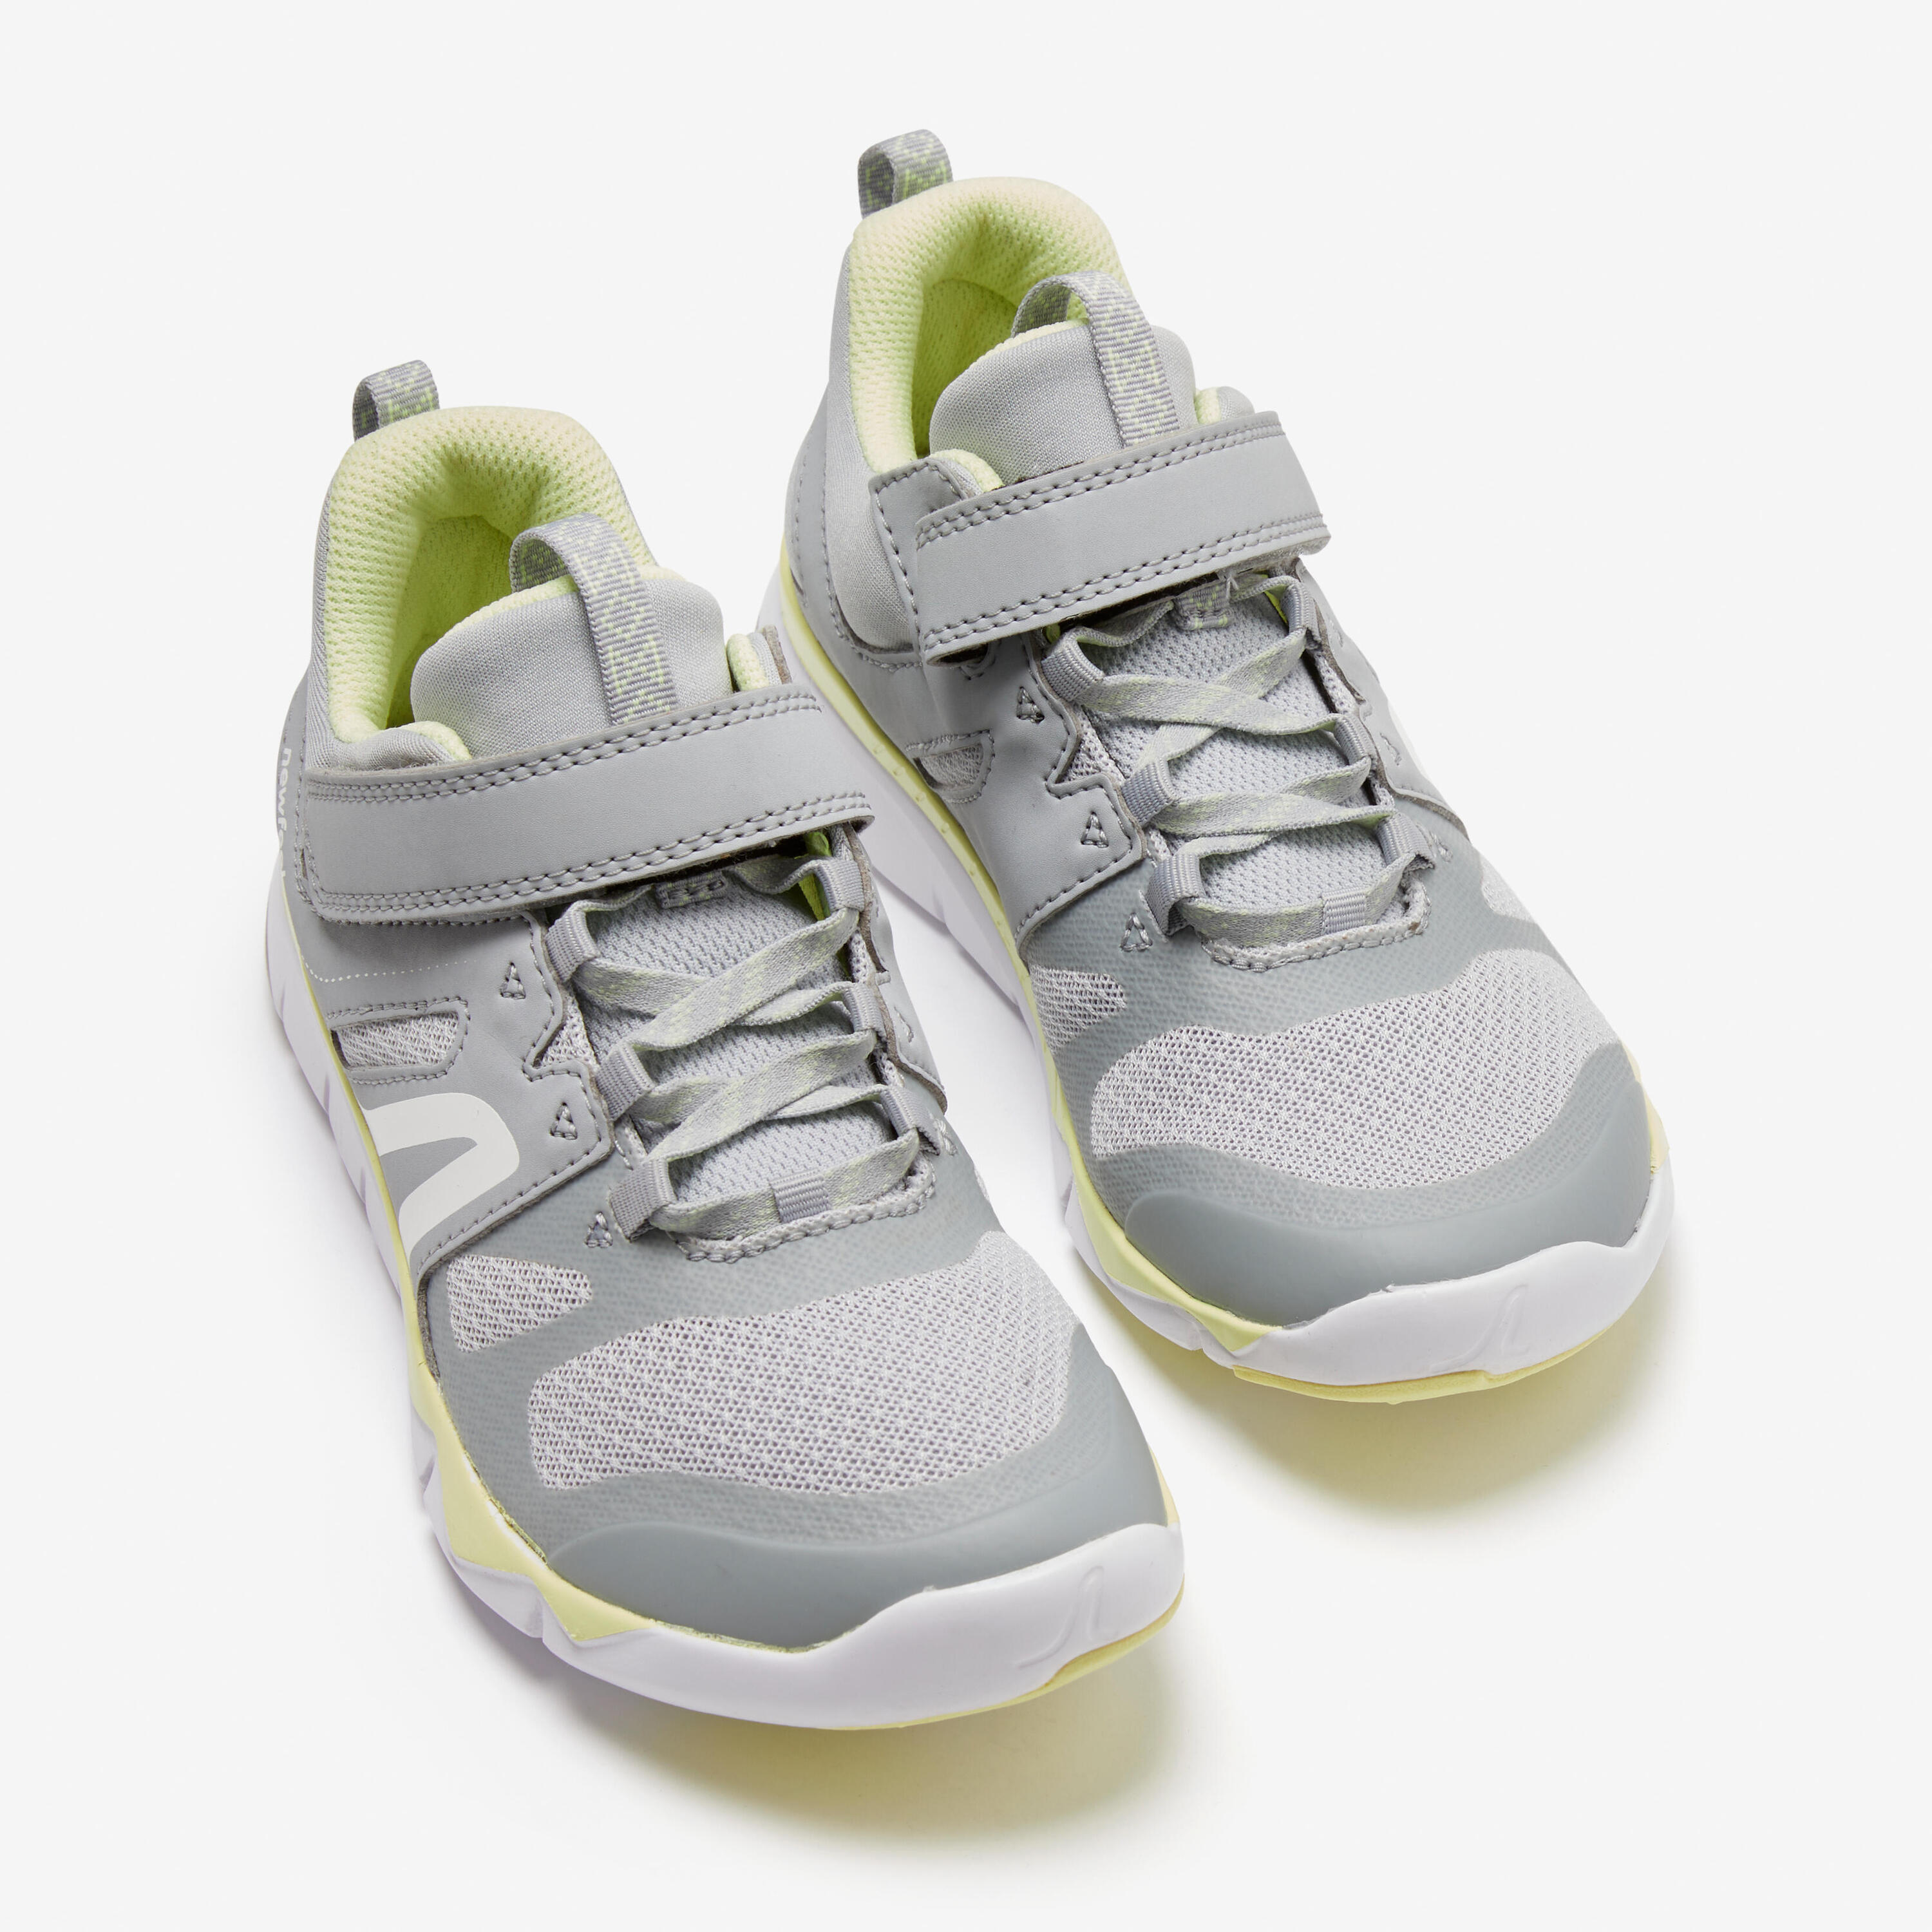 Kids' lightweight and breathable rip-tab trainers, grey/yellow 7/11